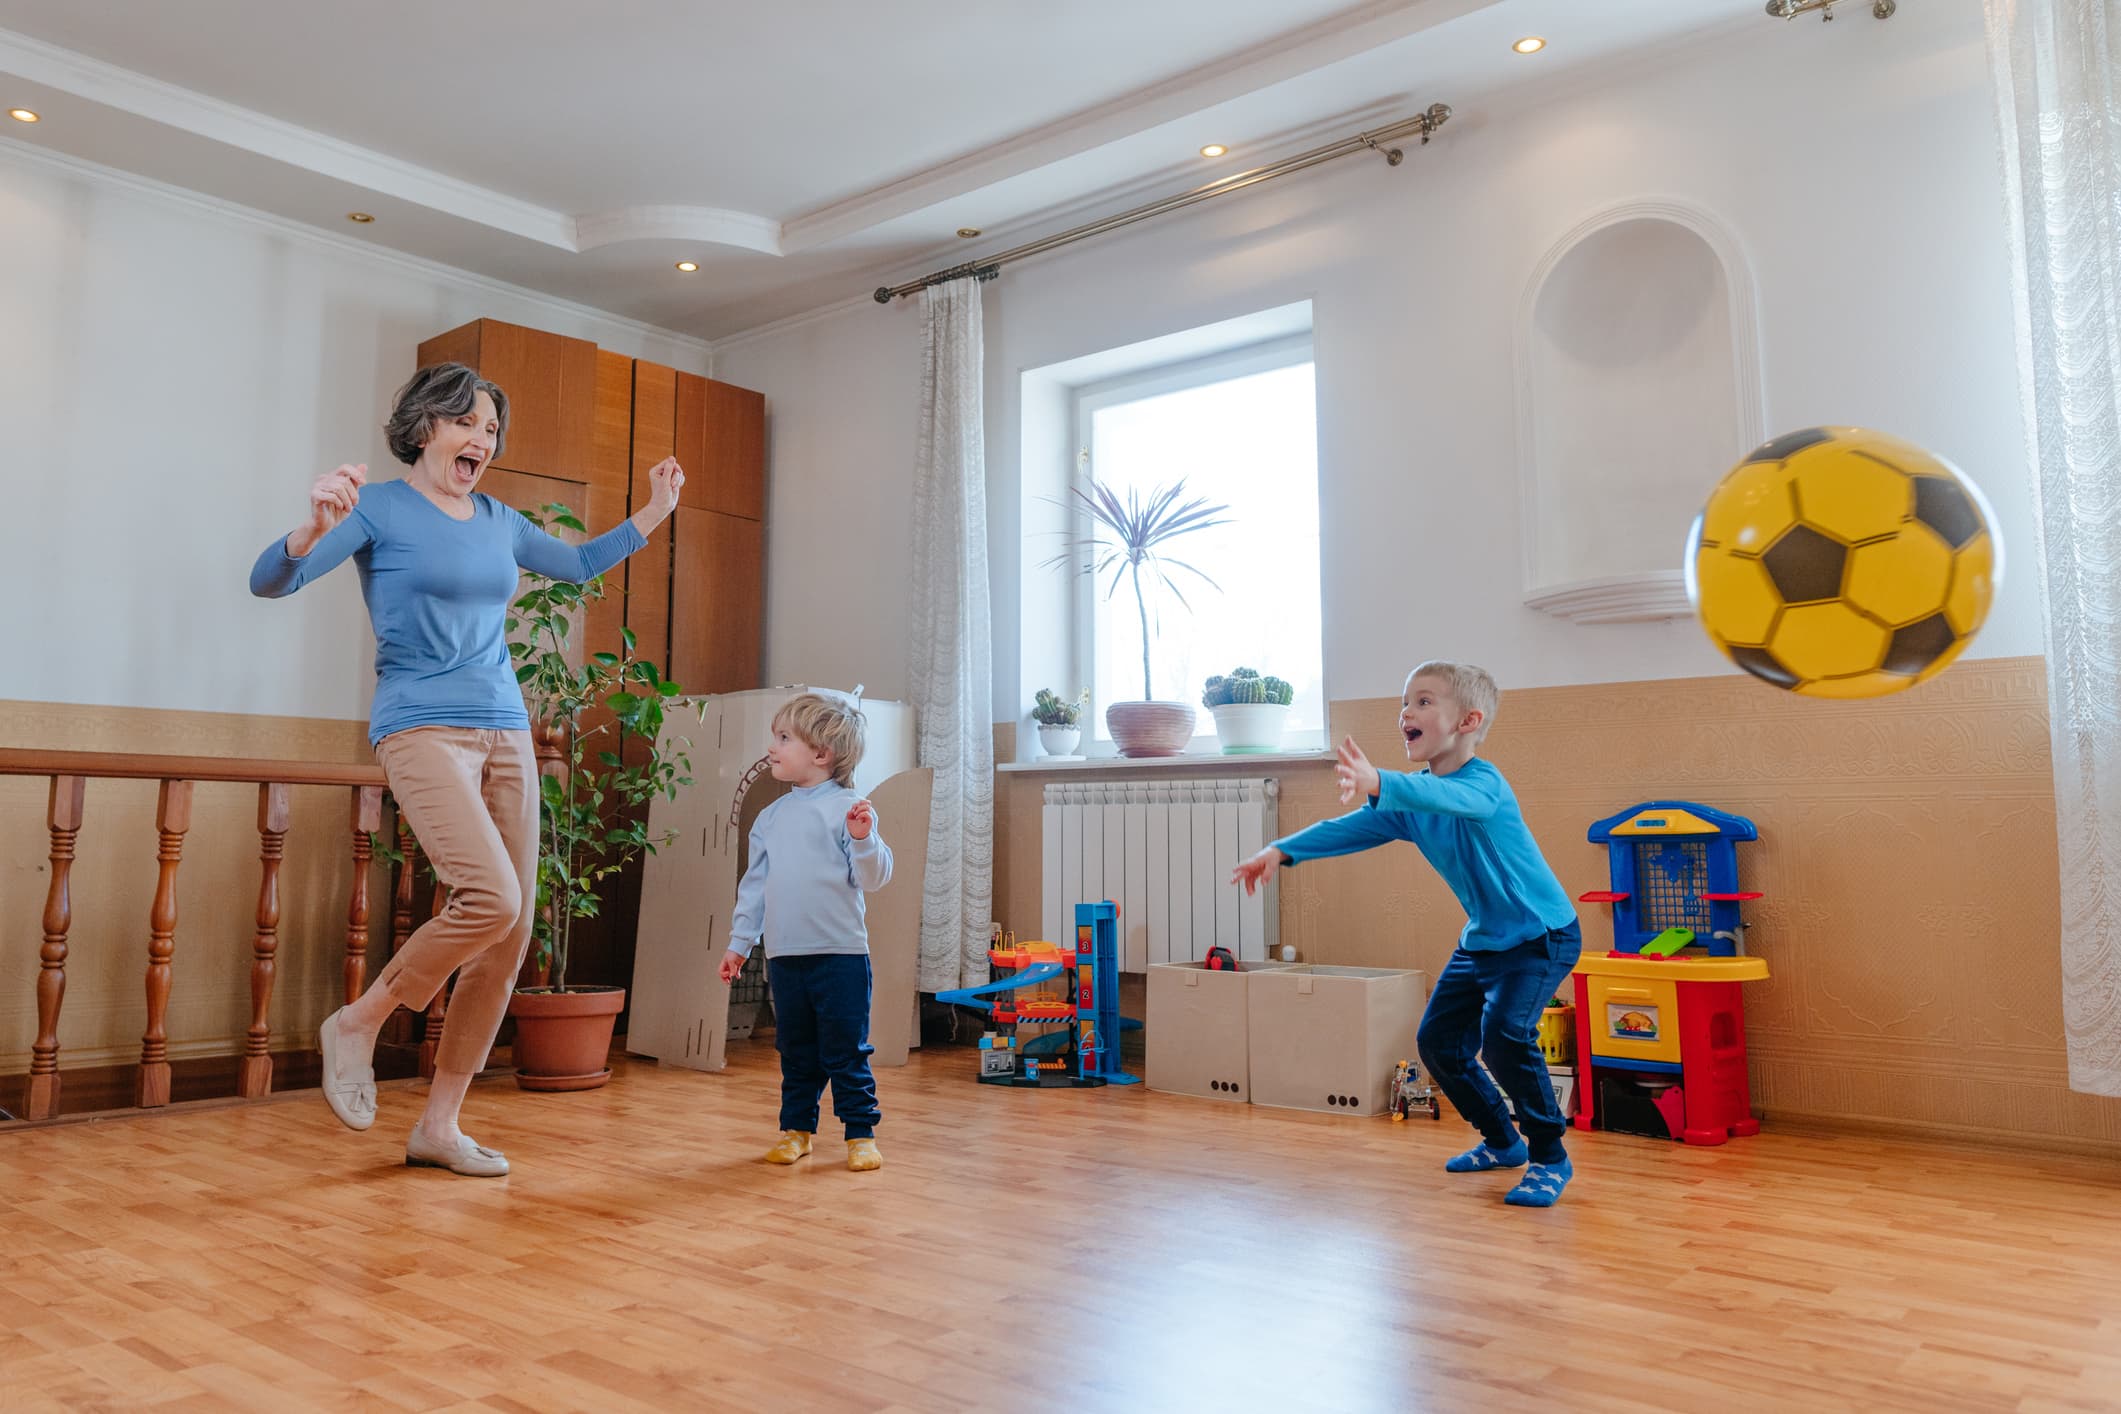 Active grandmother playing the ball with her grandchildren in the kids room indoor.